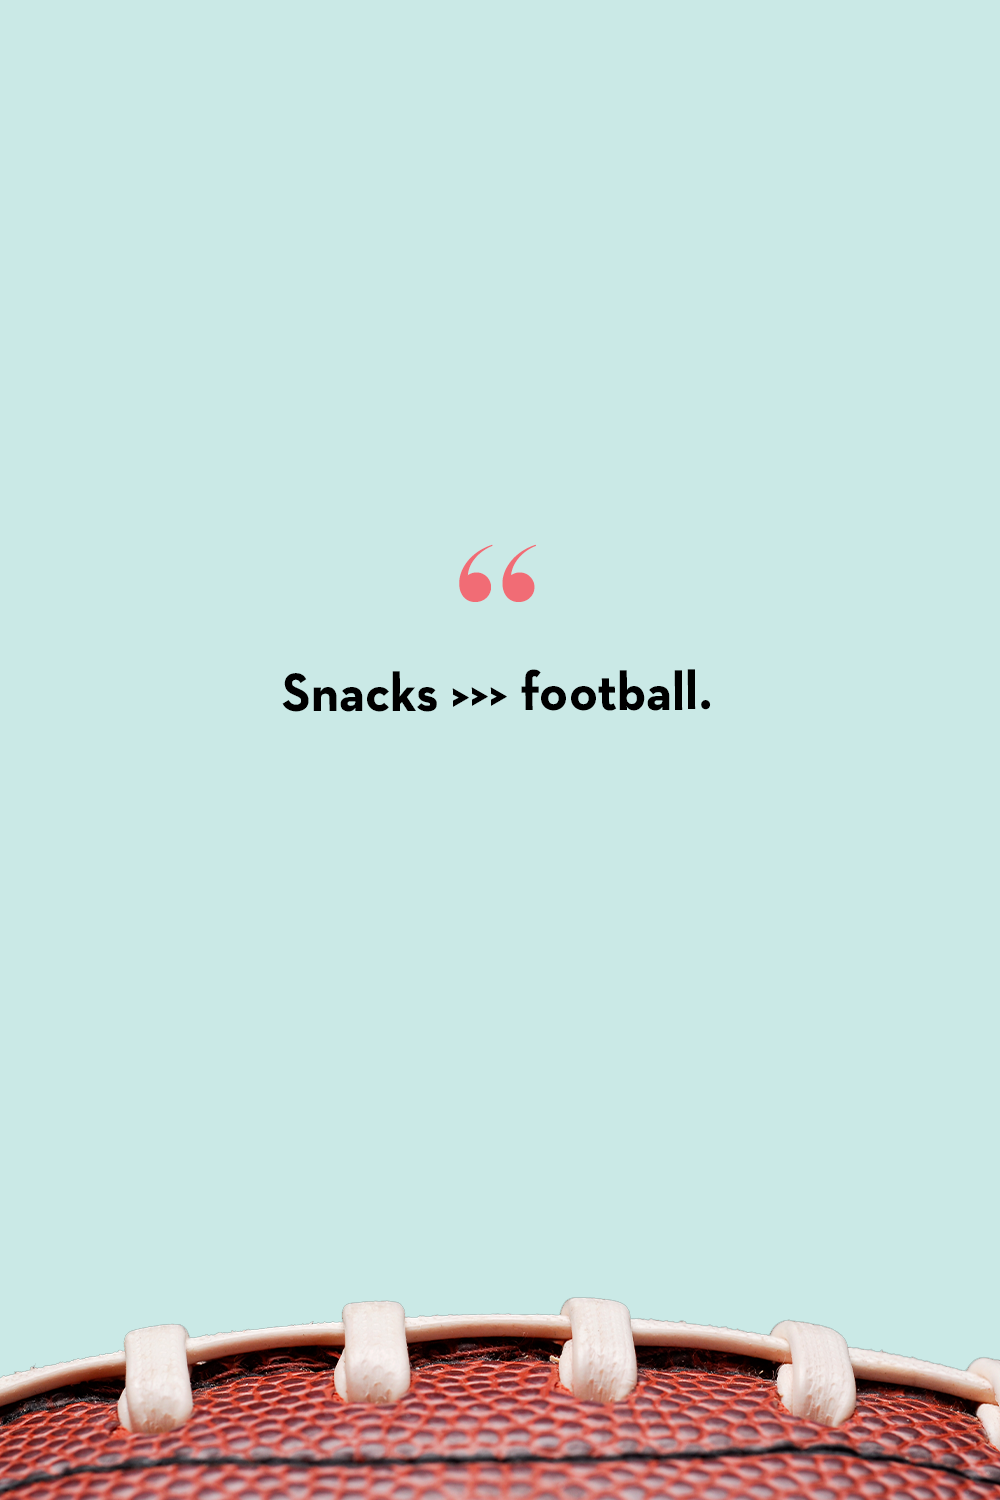 80 Best Super Bowl Instagram Captions 2023 - Football and Food Sayings